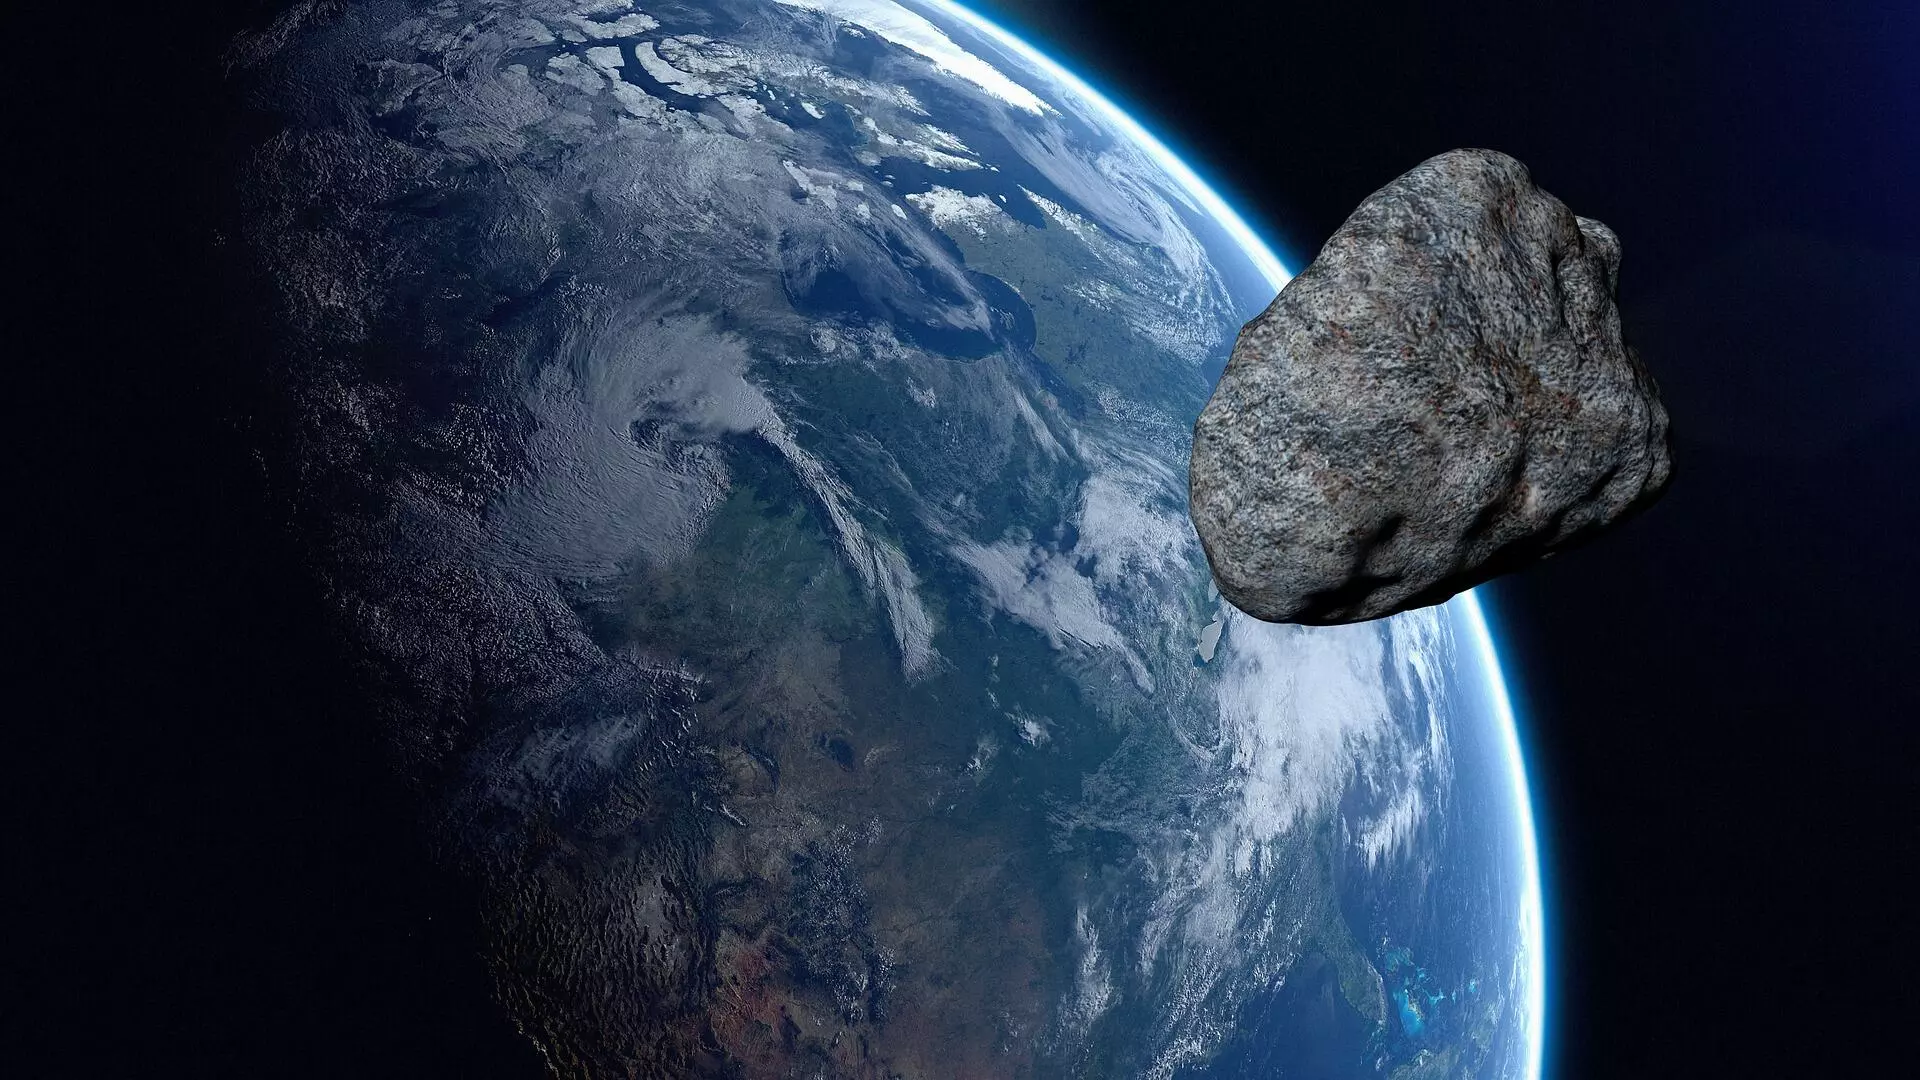 Asteroid deflection mission ejected 7 railcars of debris into space